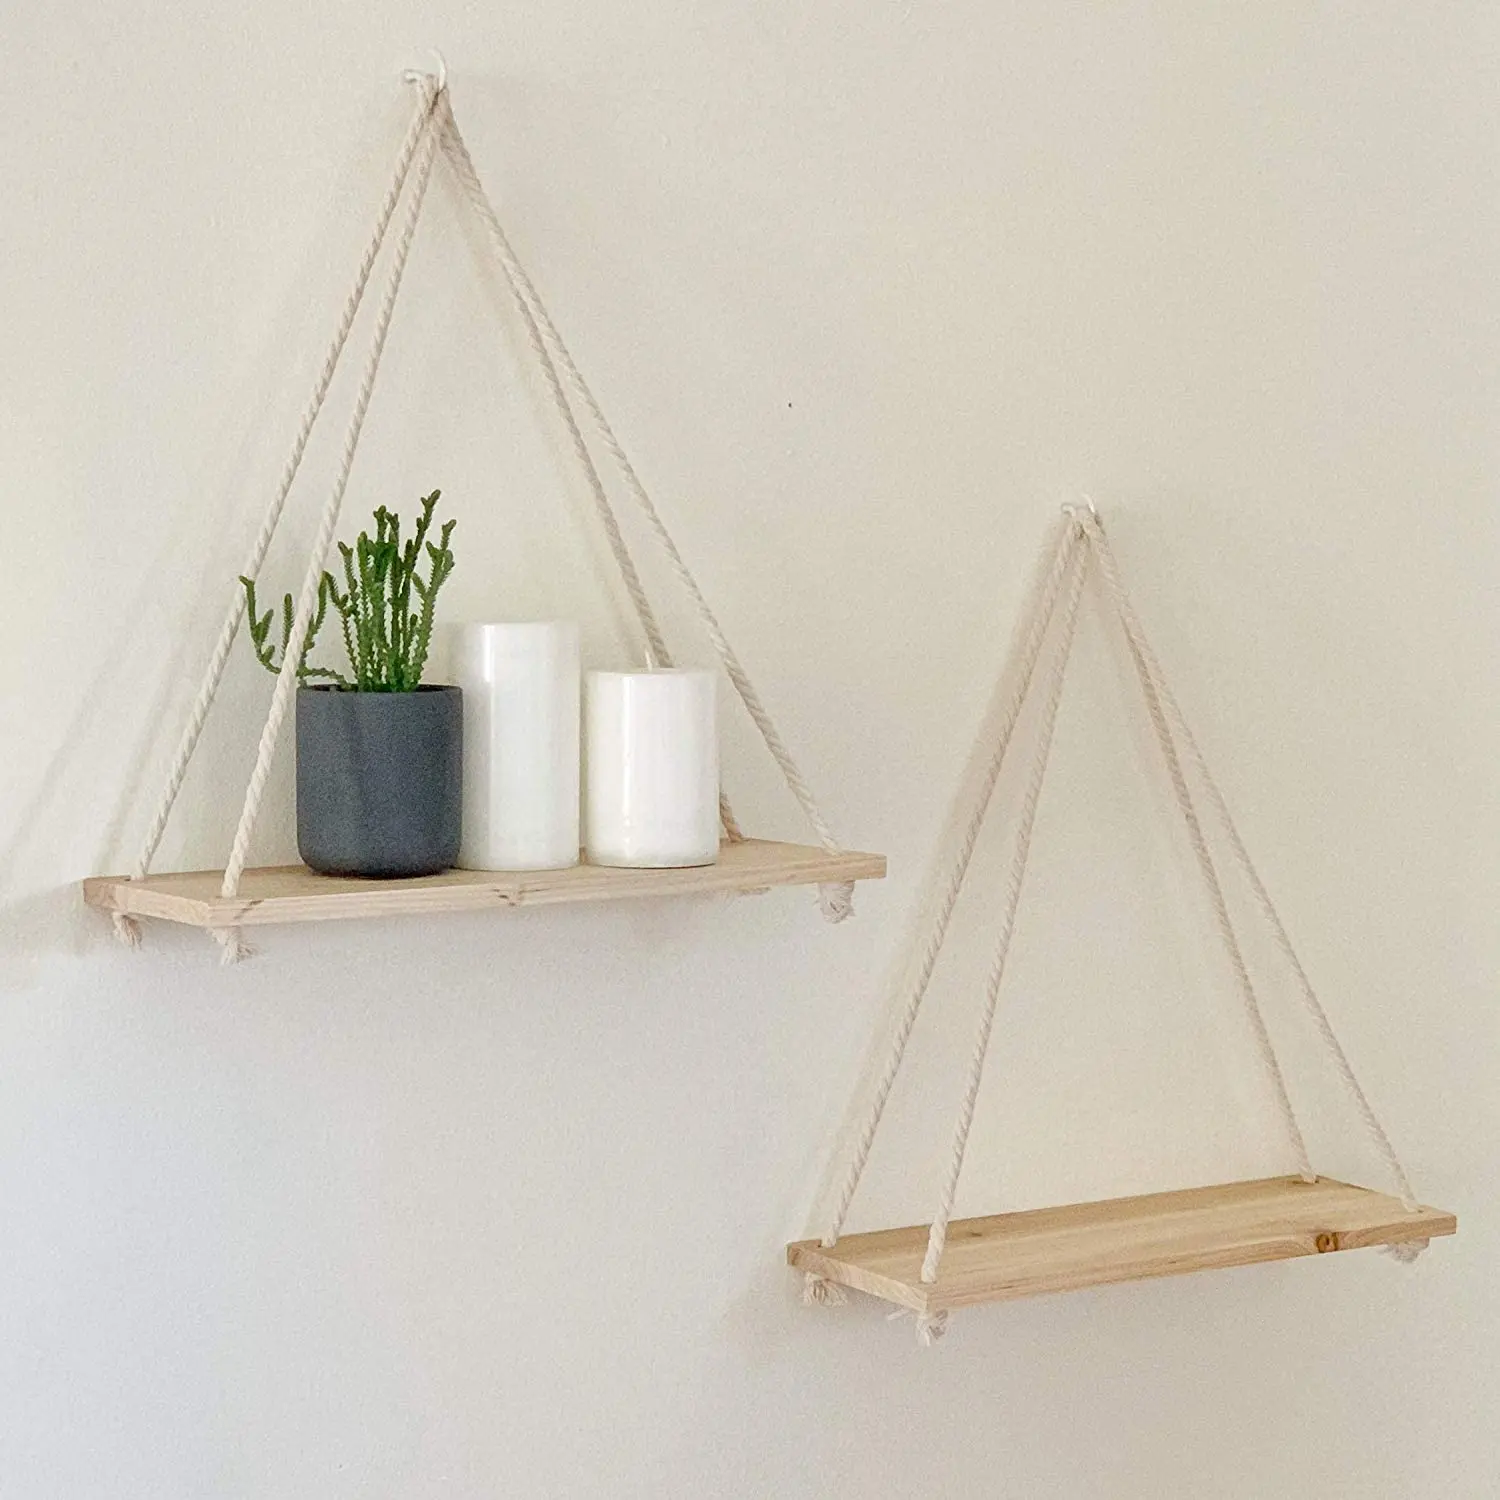 Wooden Rope Swing Wall Hanging Plant Flower Pot Tray Mounted Floating Wall Shelves Nordic Home Decoration Moredn Wall Decoration